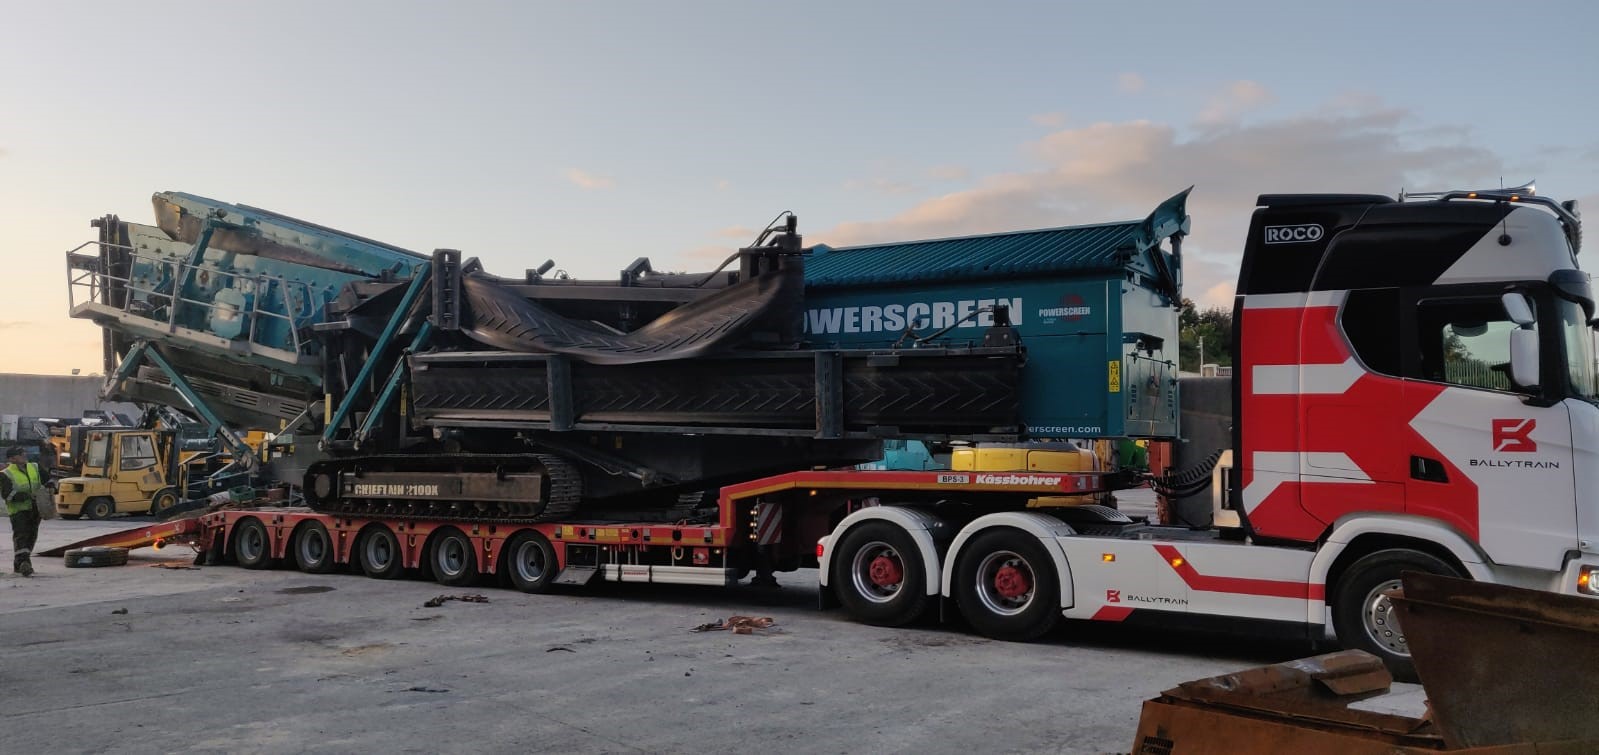 Powerscreen Chieftain 2100x Sold to Europe